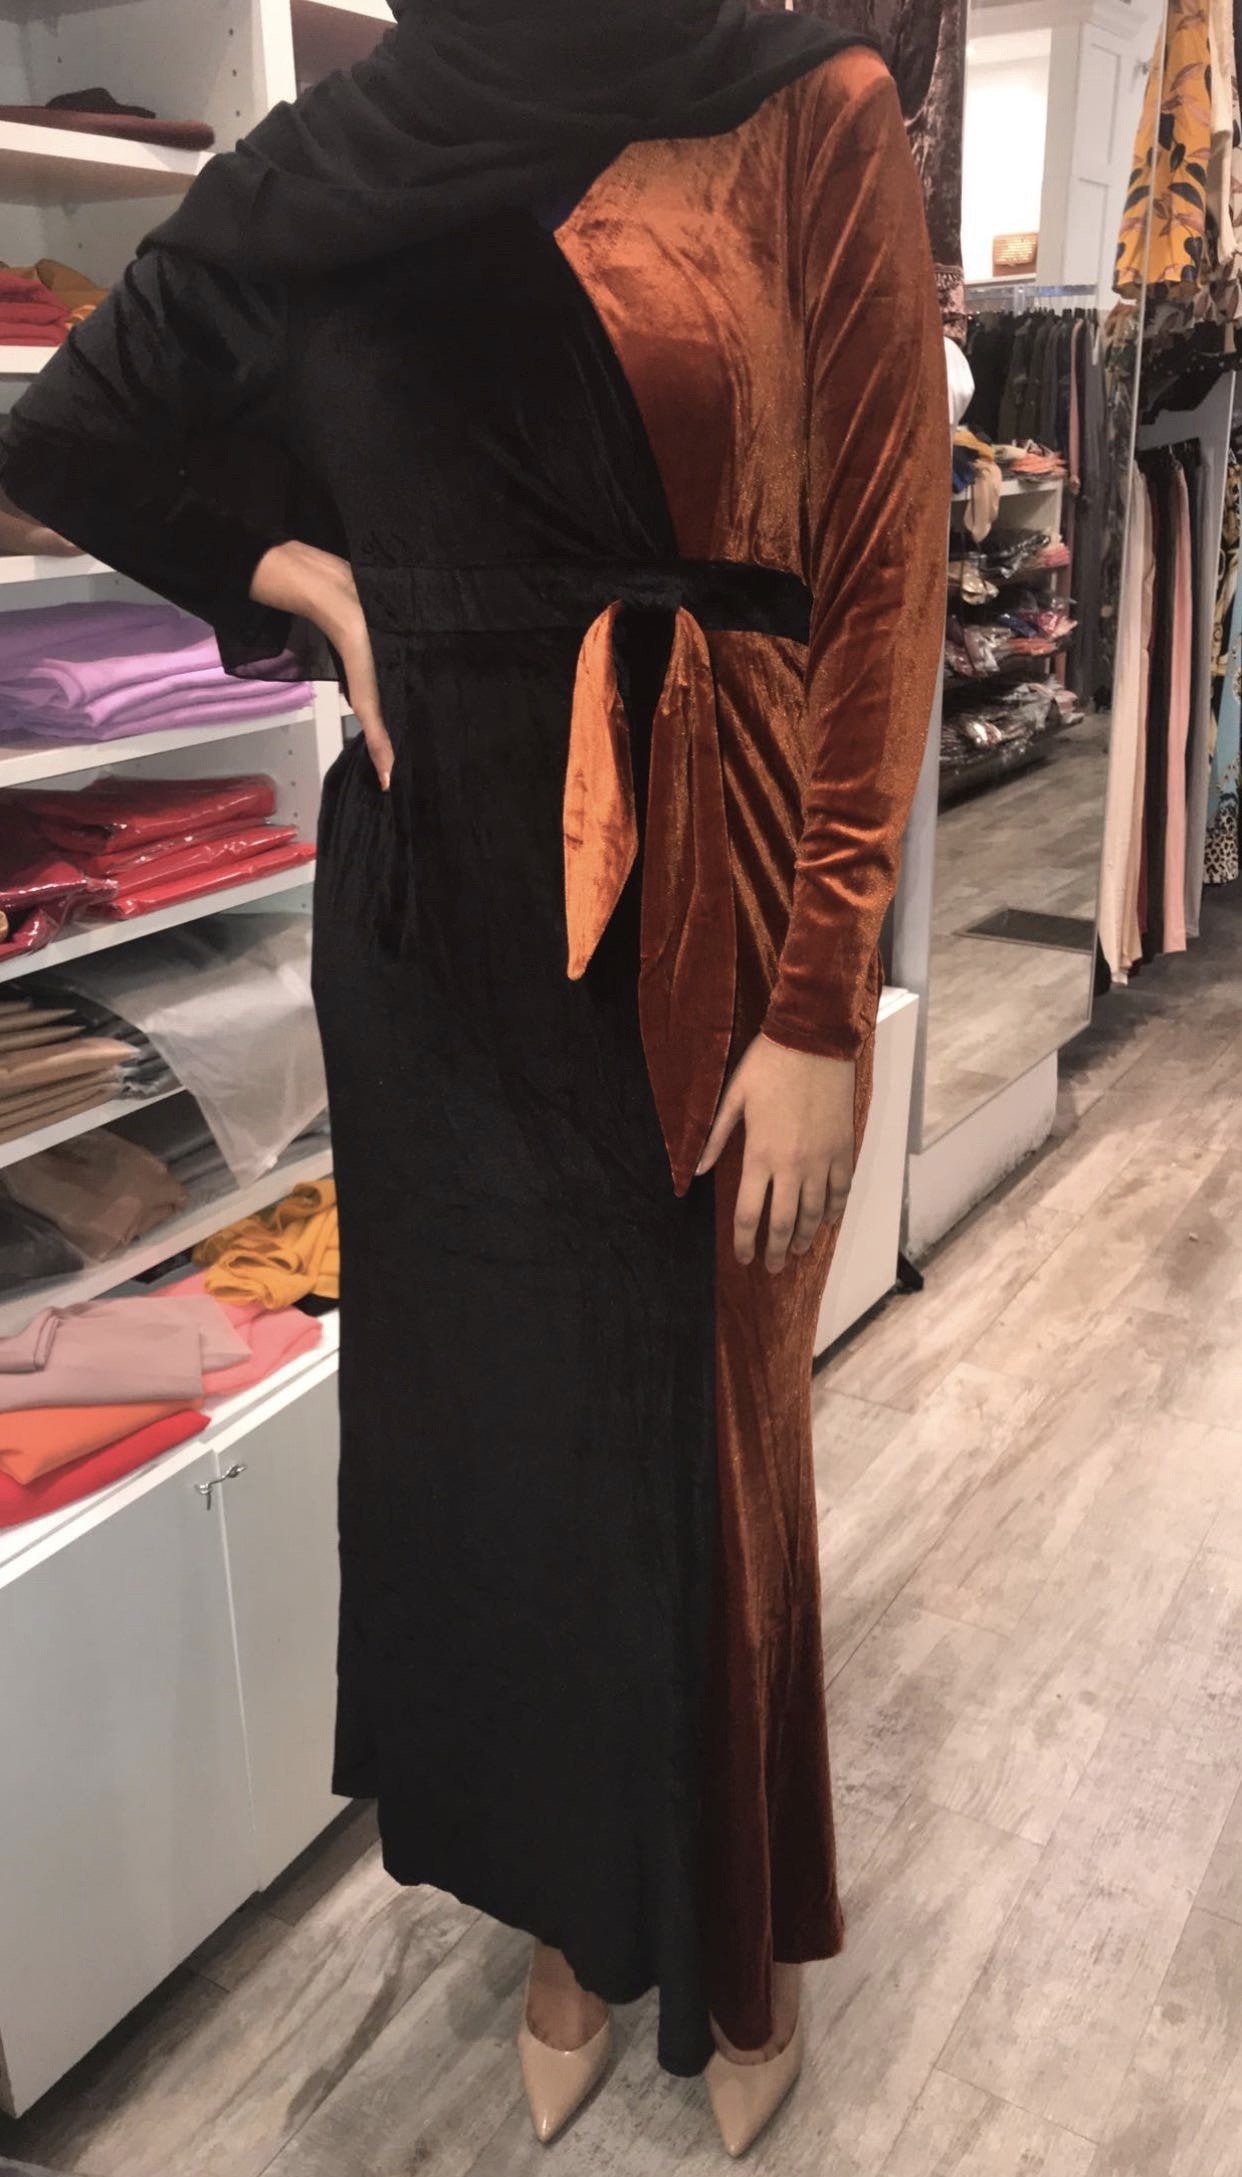 Two Tone Velvet Evening Dress in Black and Orange Colors available at ZIZI Boutique